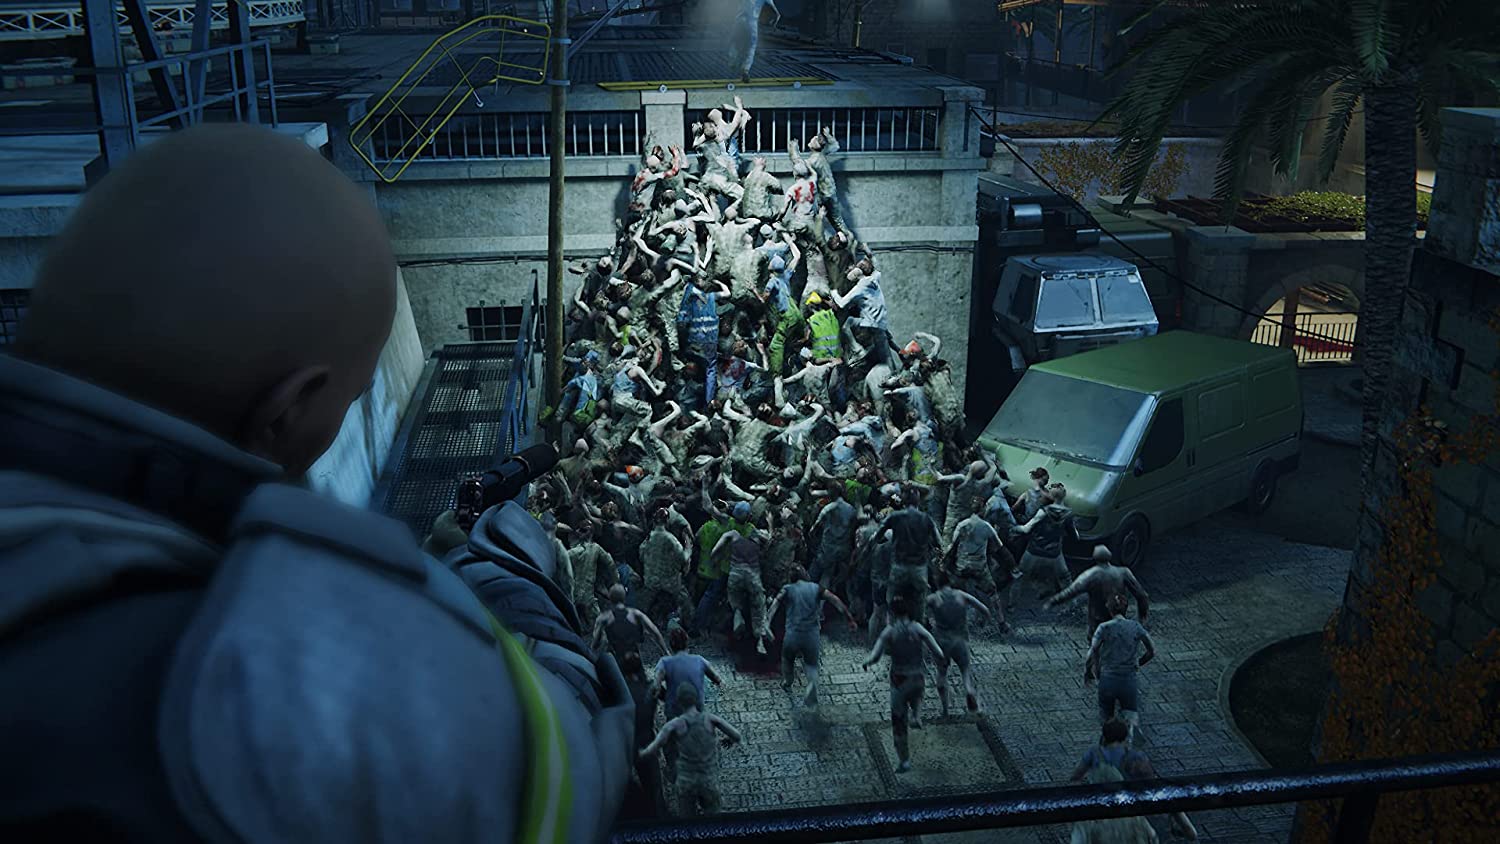 World War Z launches on Switch this fall